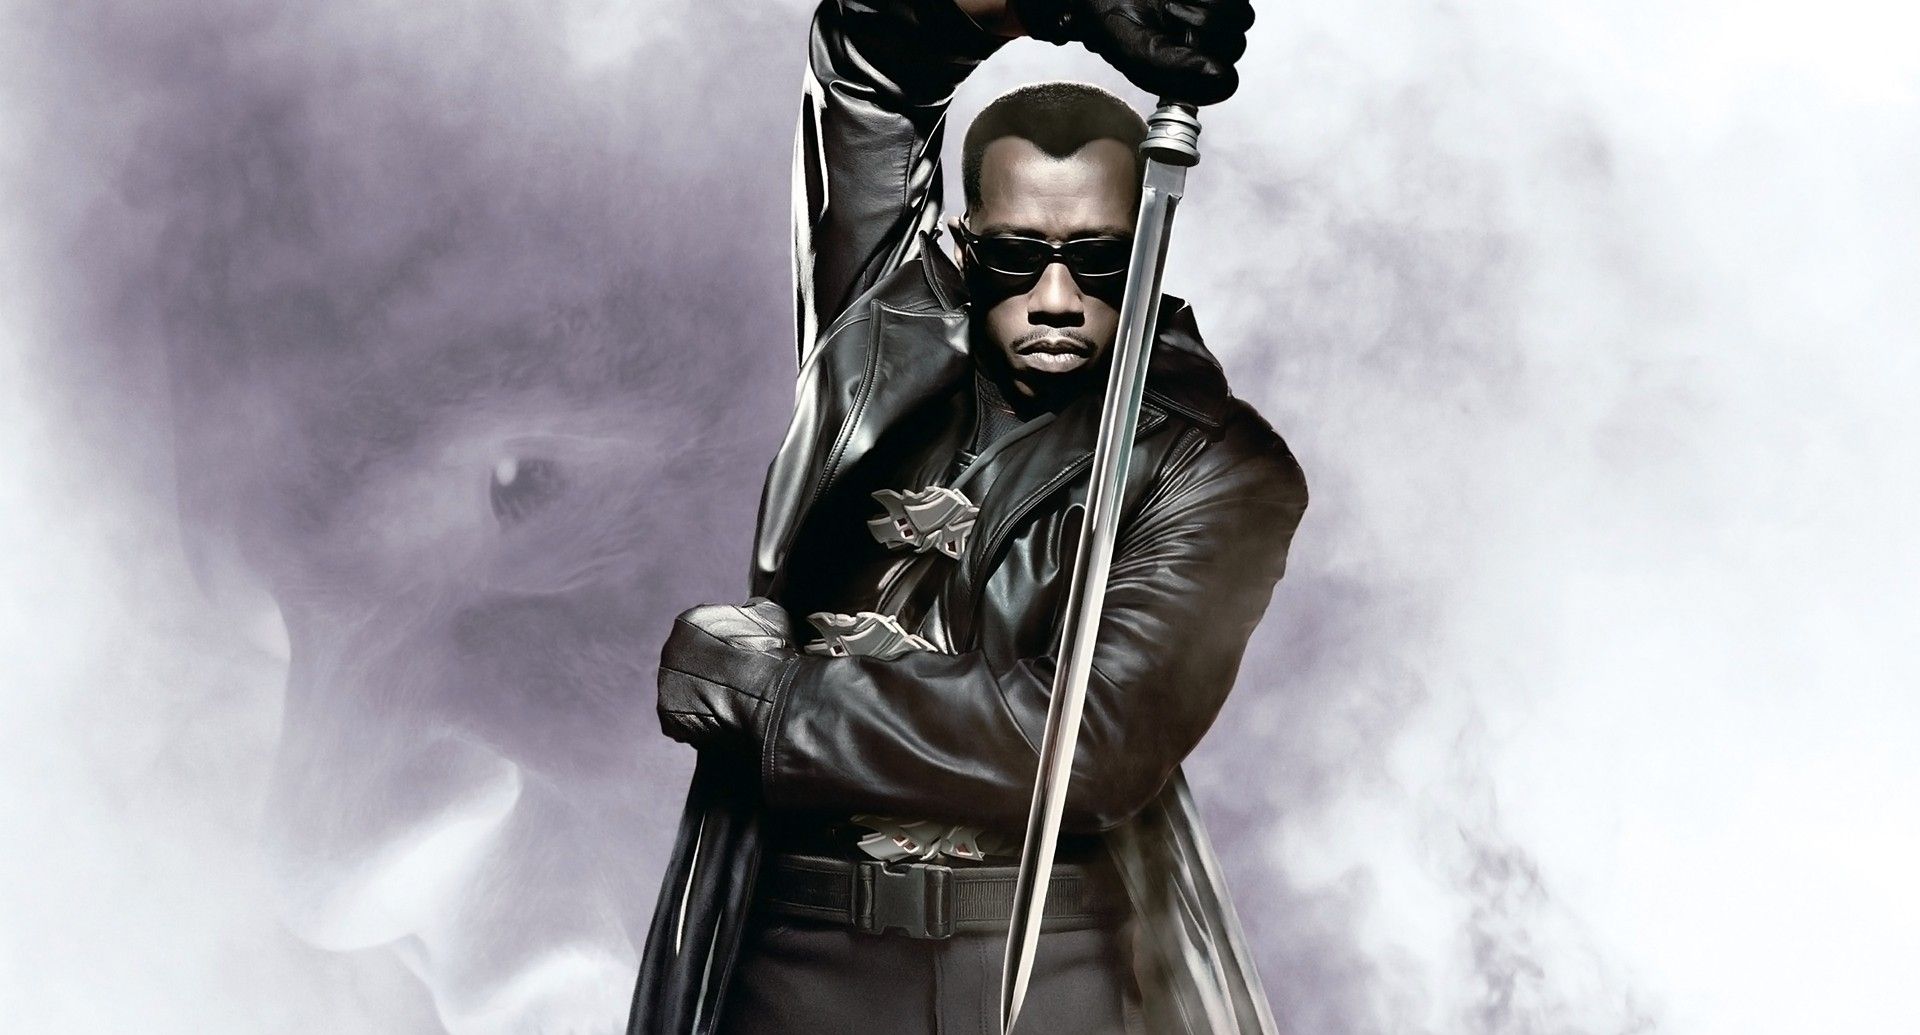 Does Wesley Snipes Want to Make Another Blade?